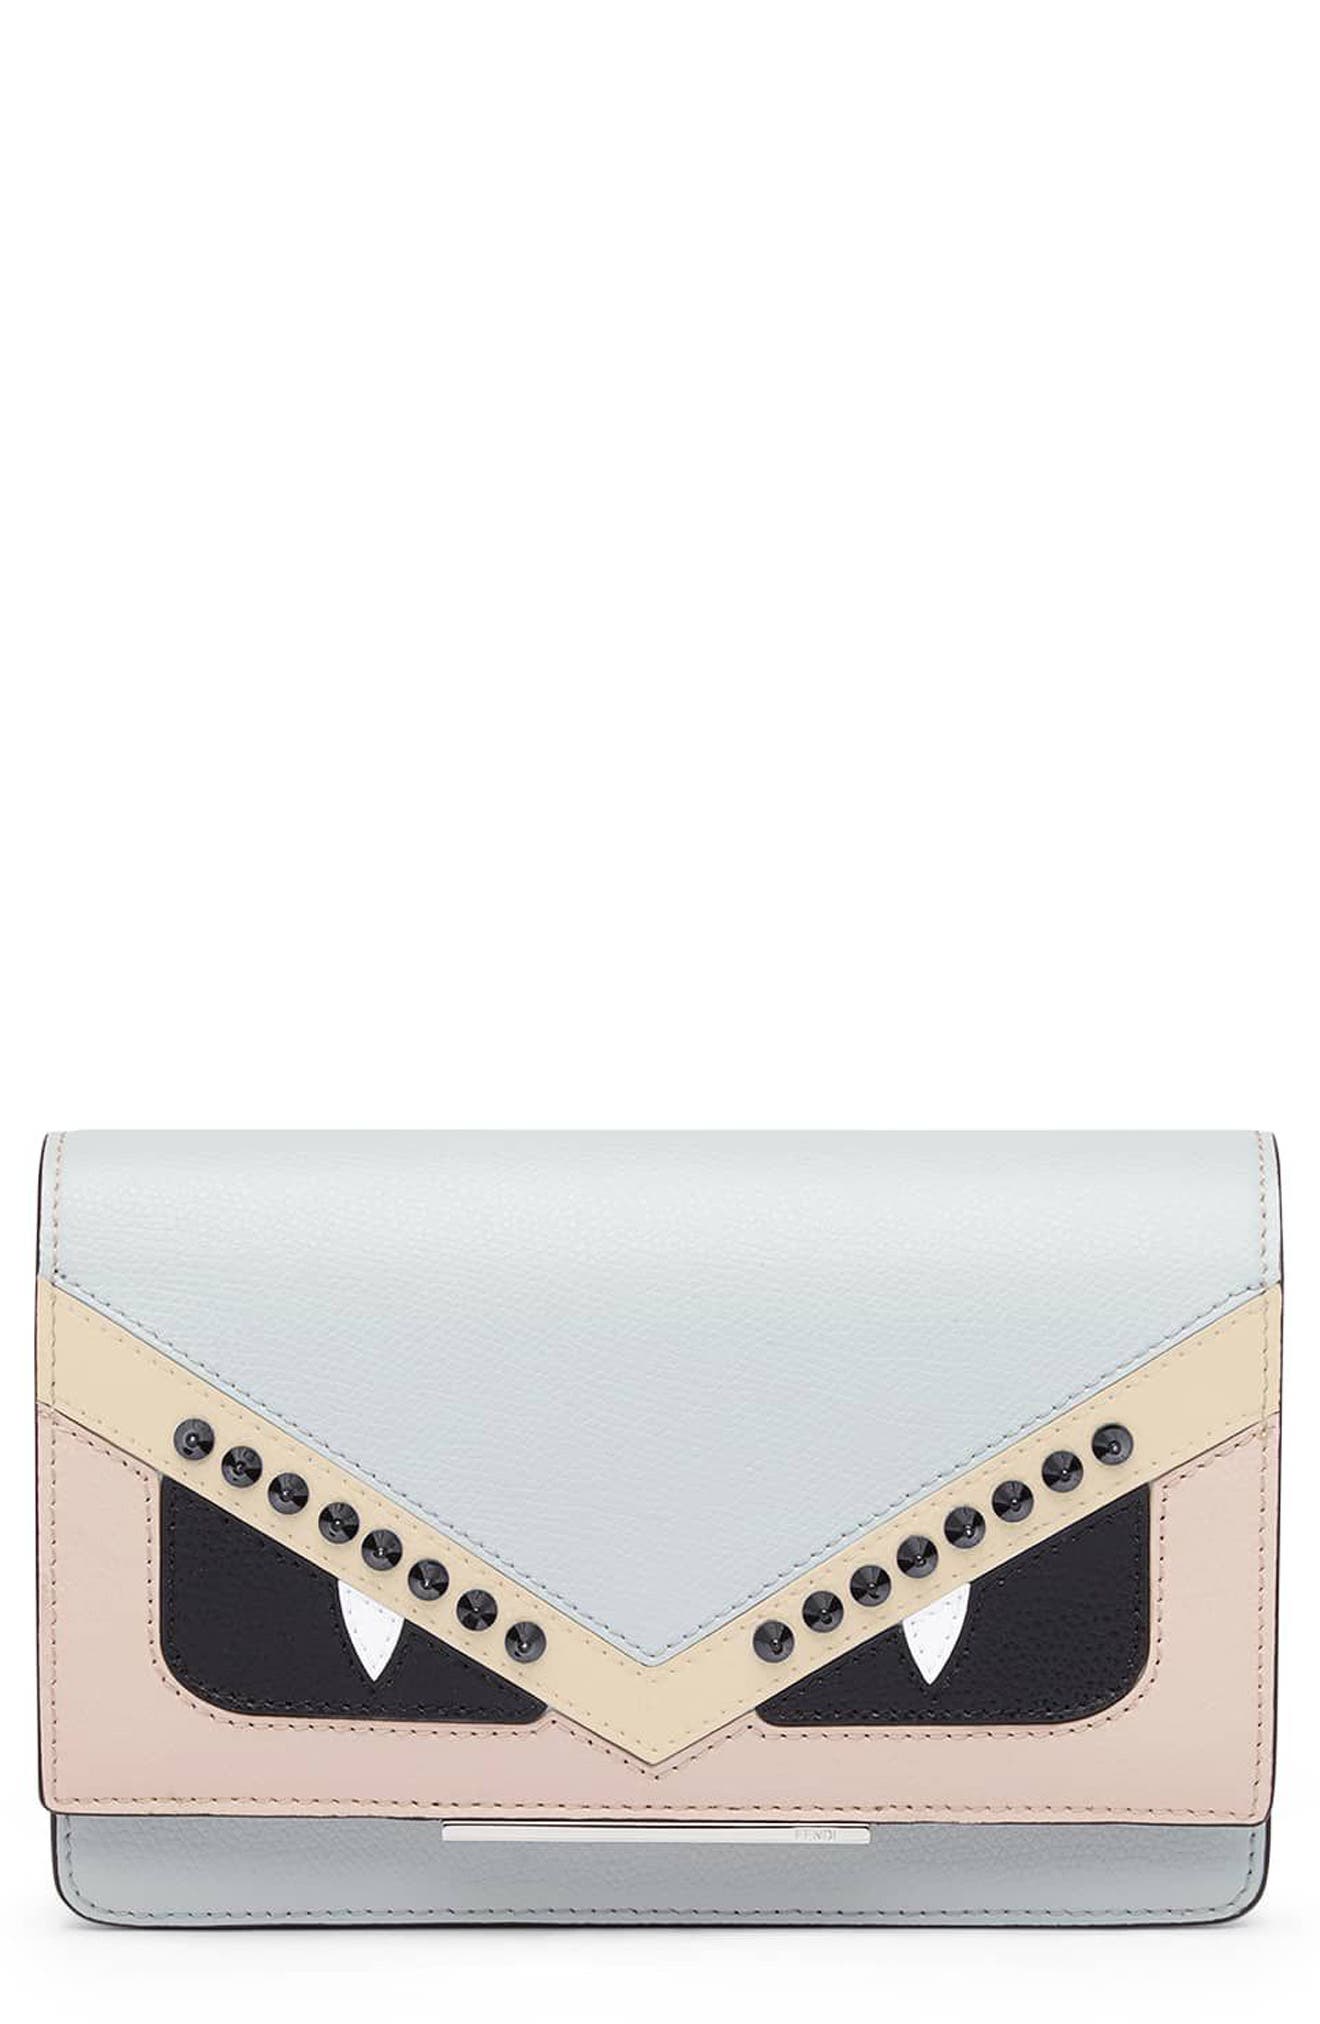 Fendi Tube Monster Leather Wallet on a 